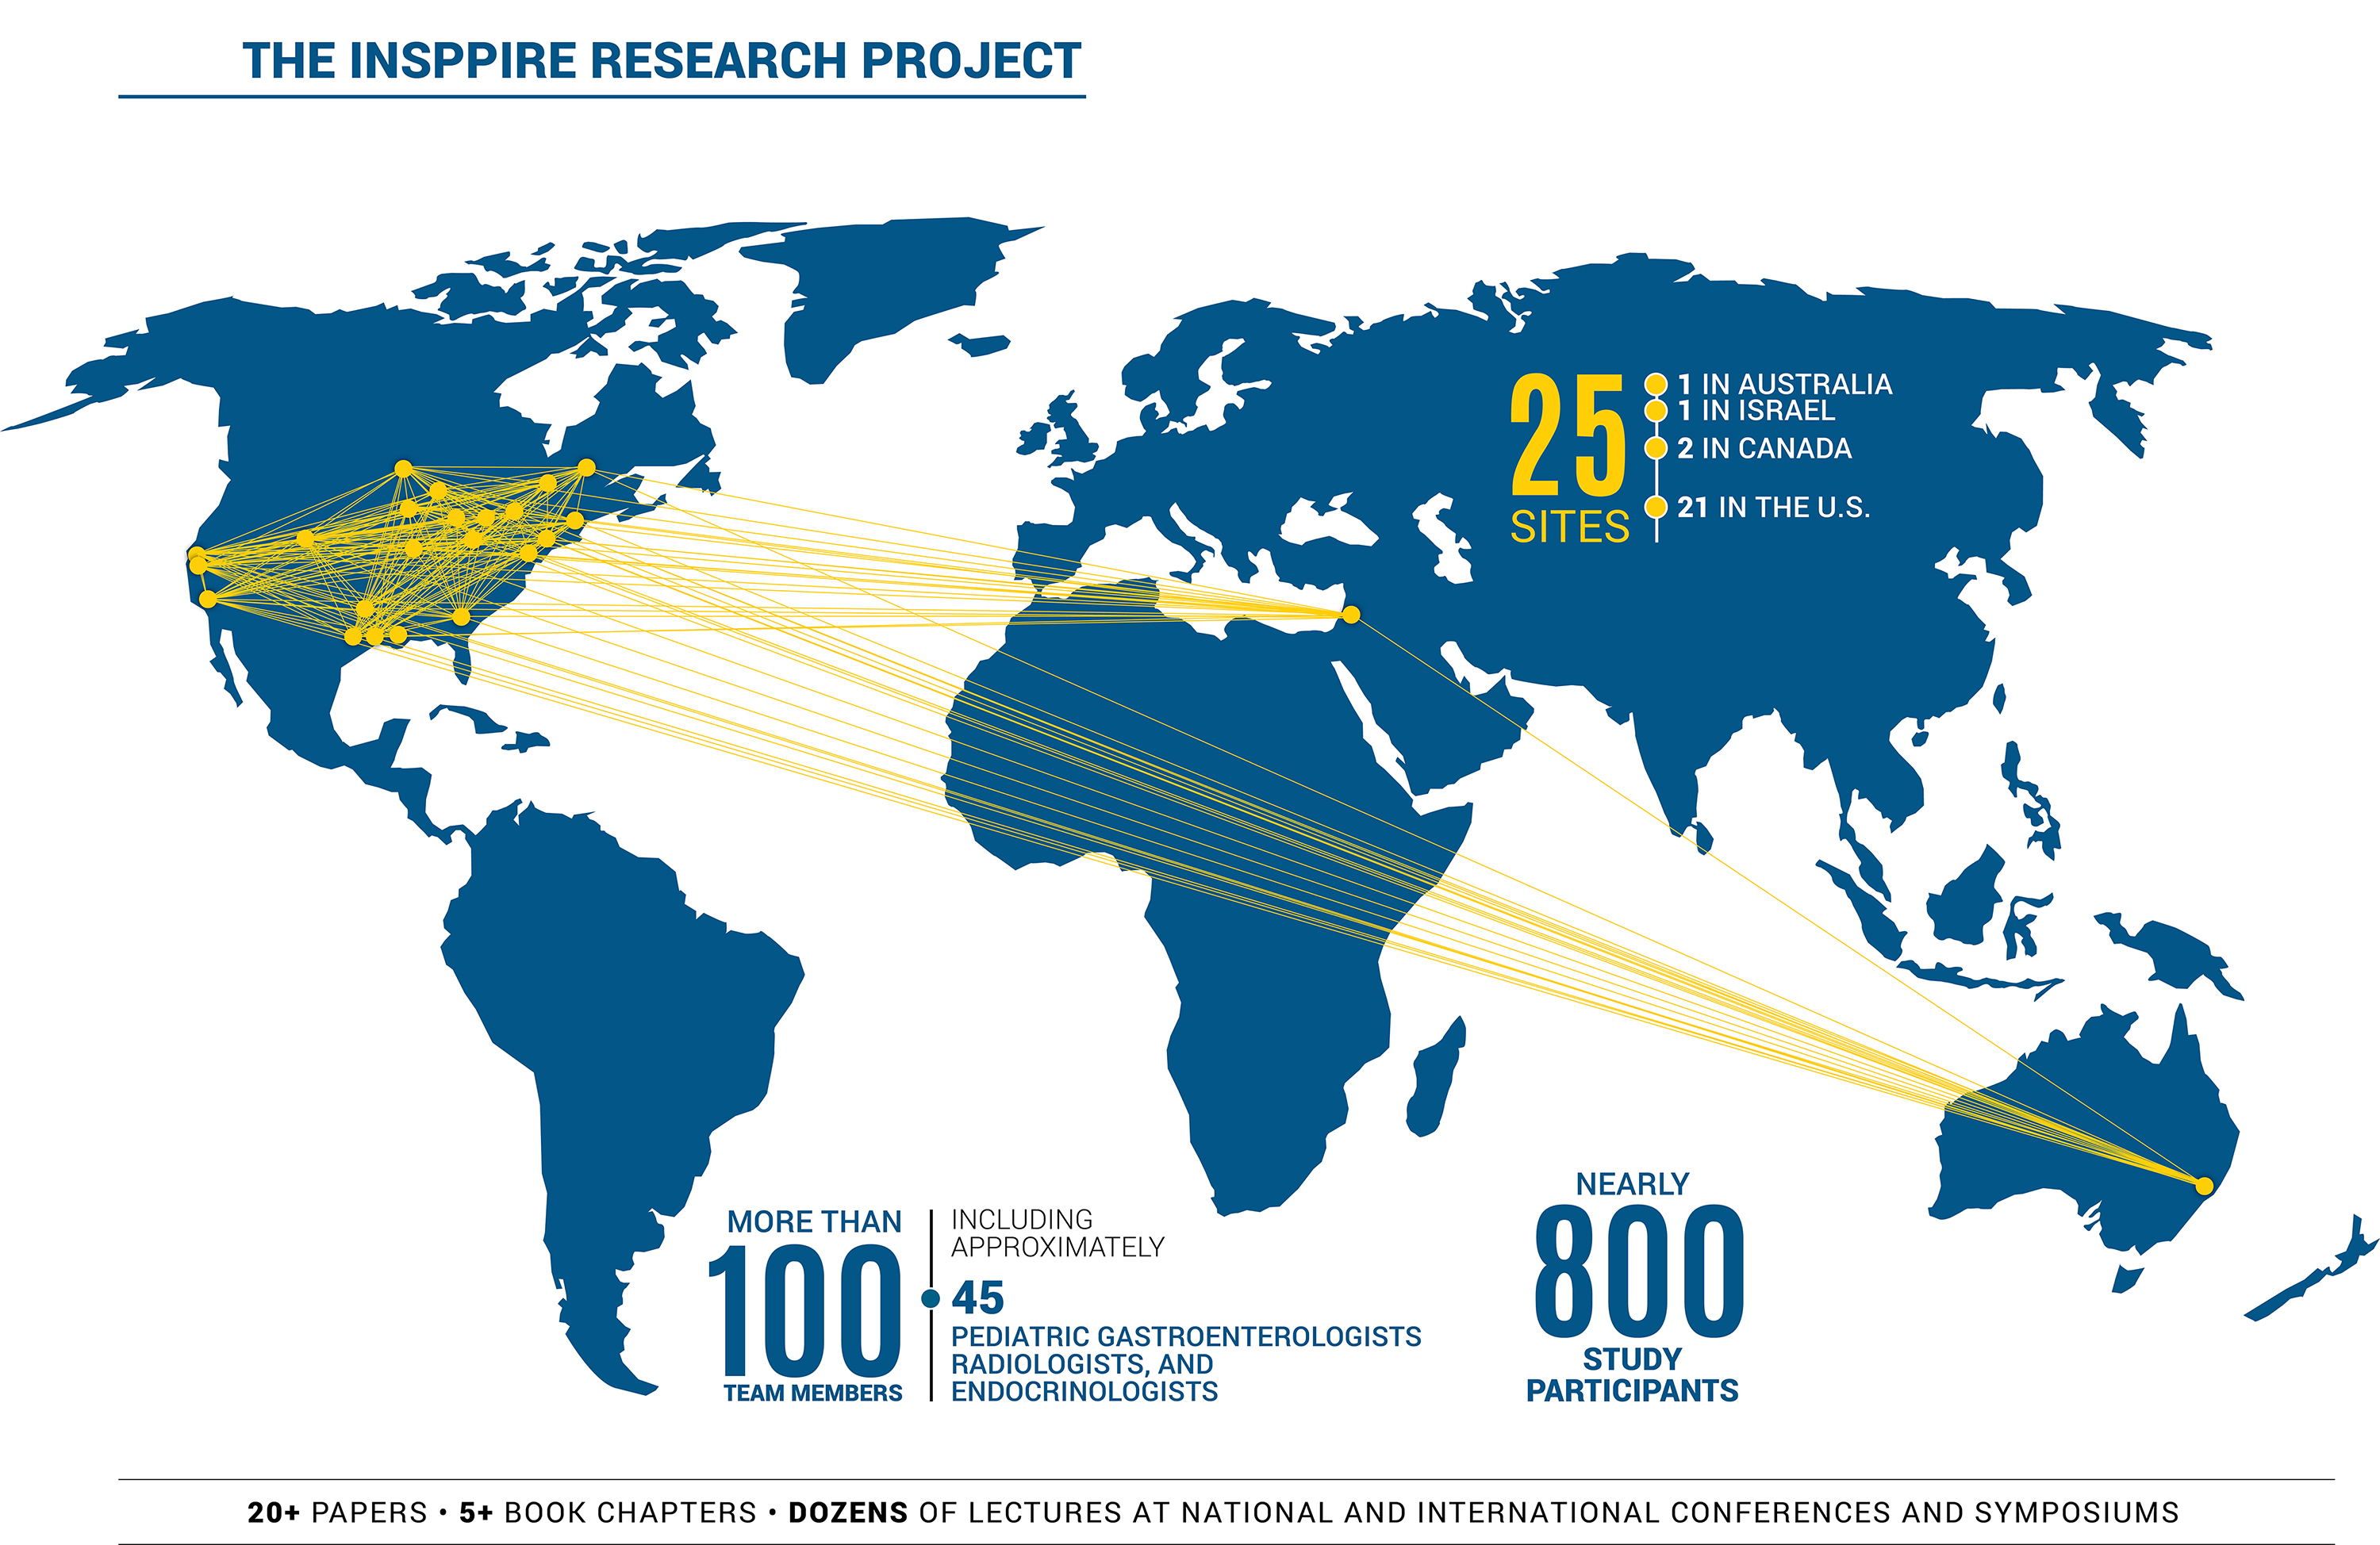 INSPPIRE research map